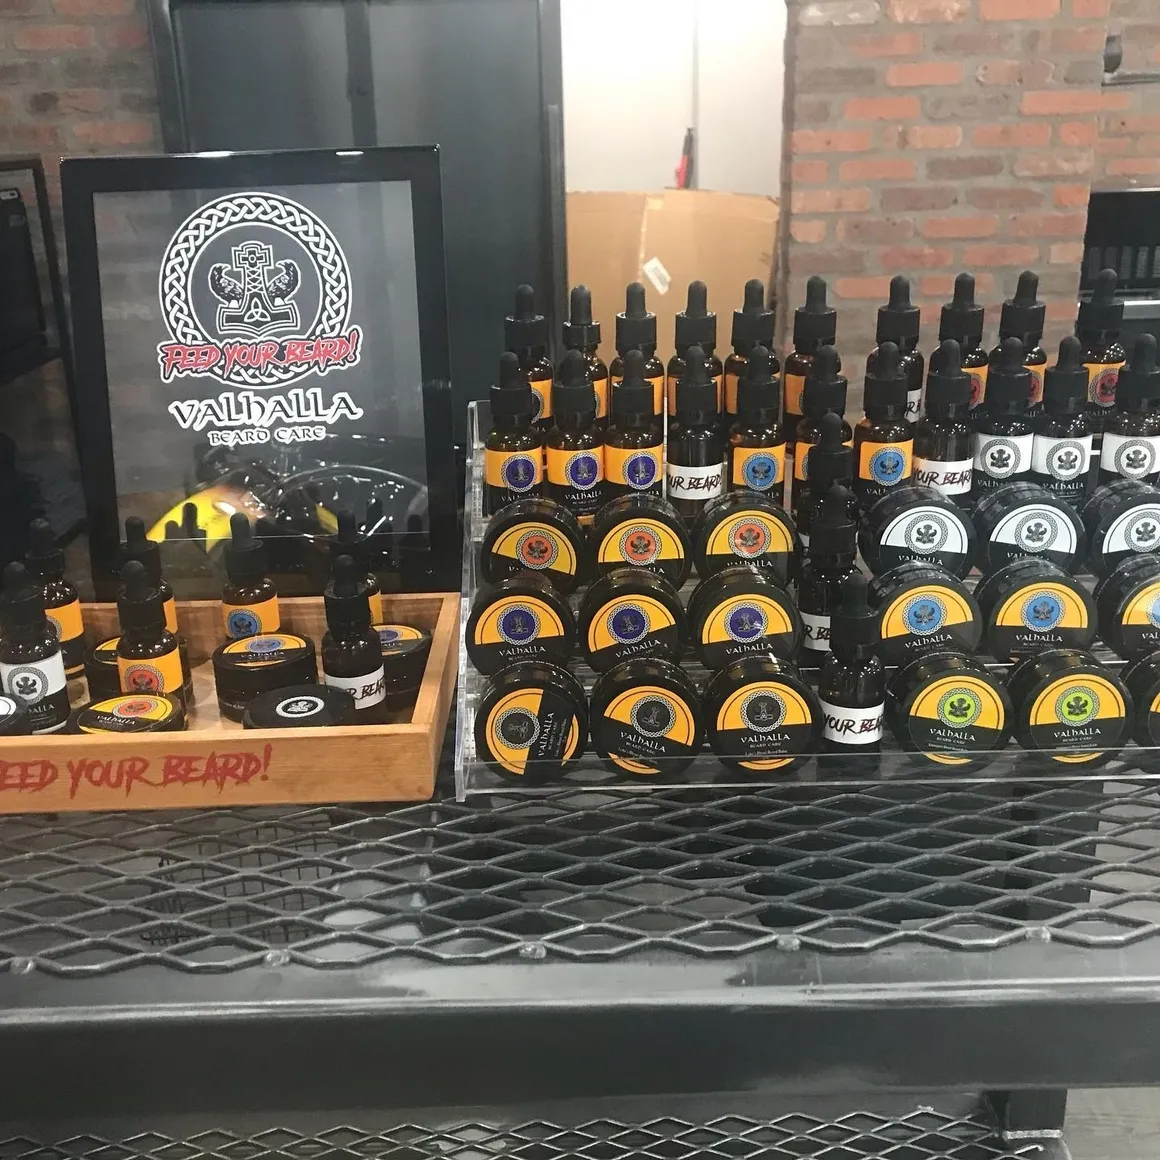 A table with many bottles of beer on it